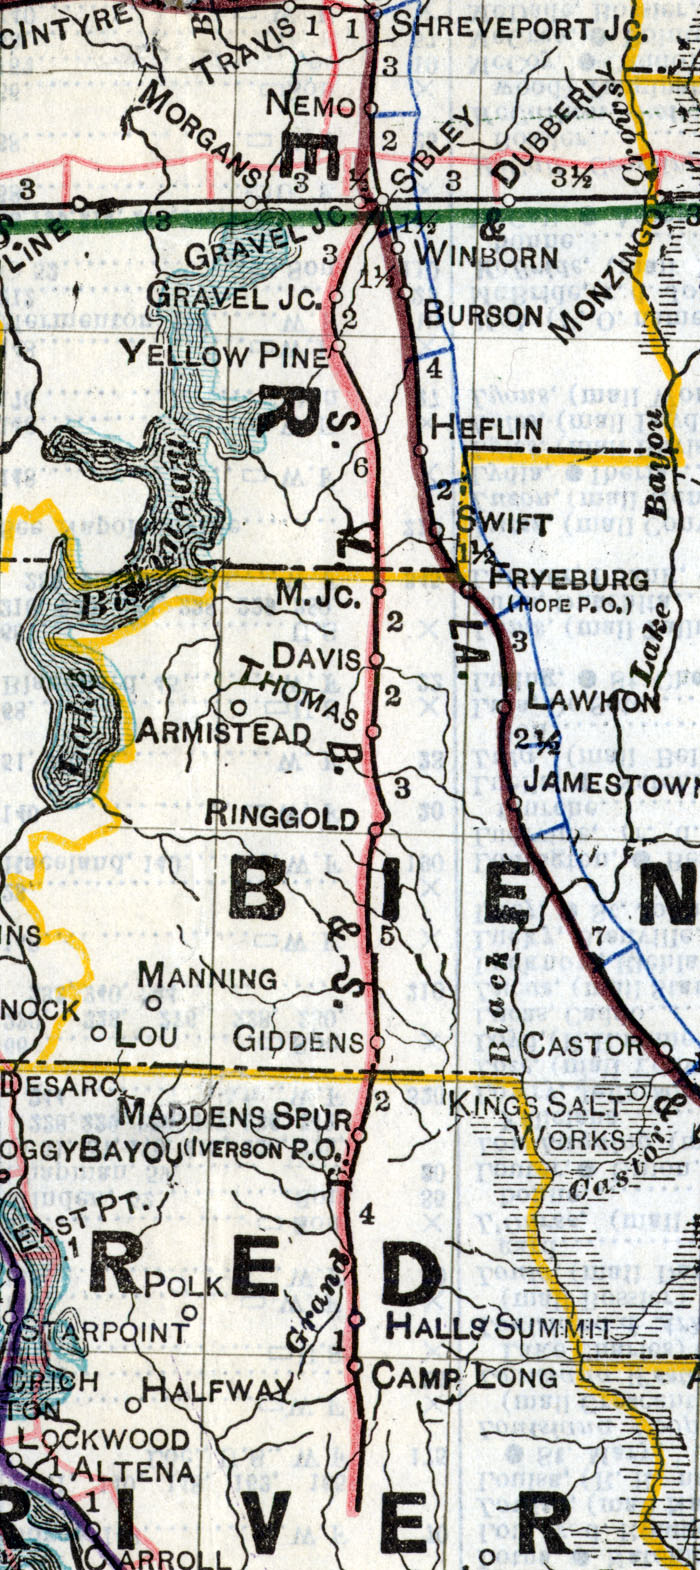 Sibley, Lake Bisteneau & Southern Railway Company (La.), Map Showing Route in 1914.